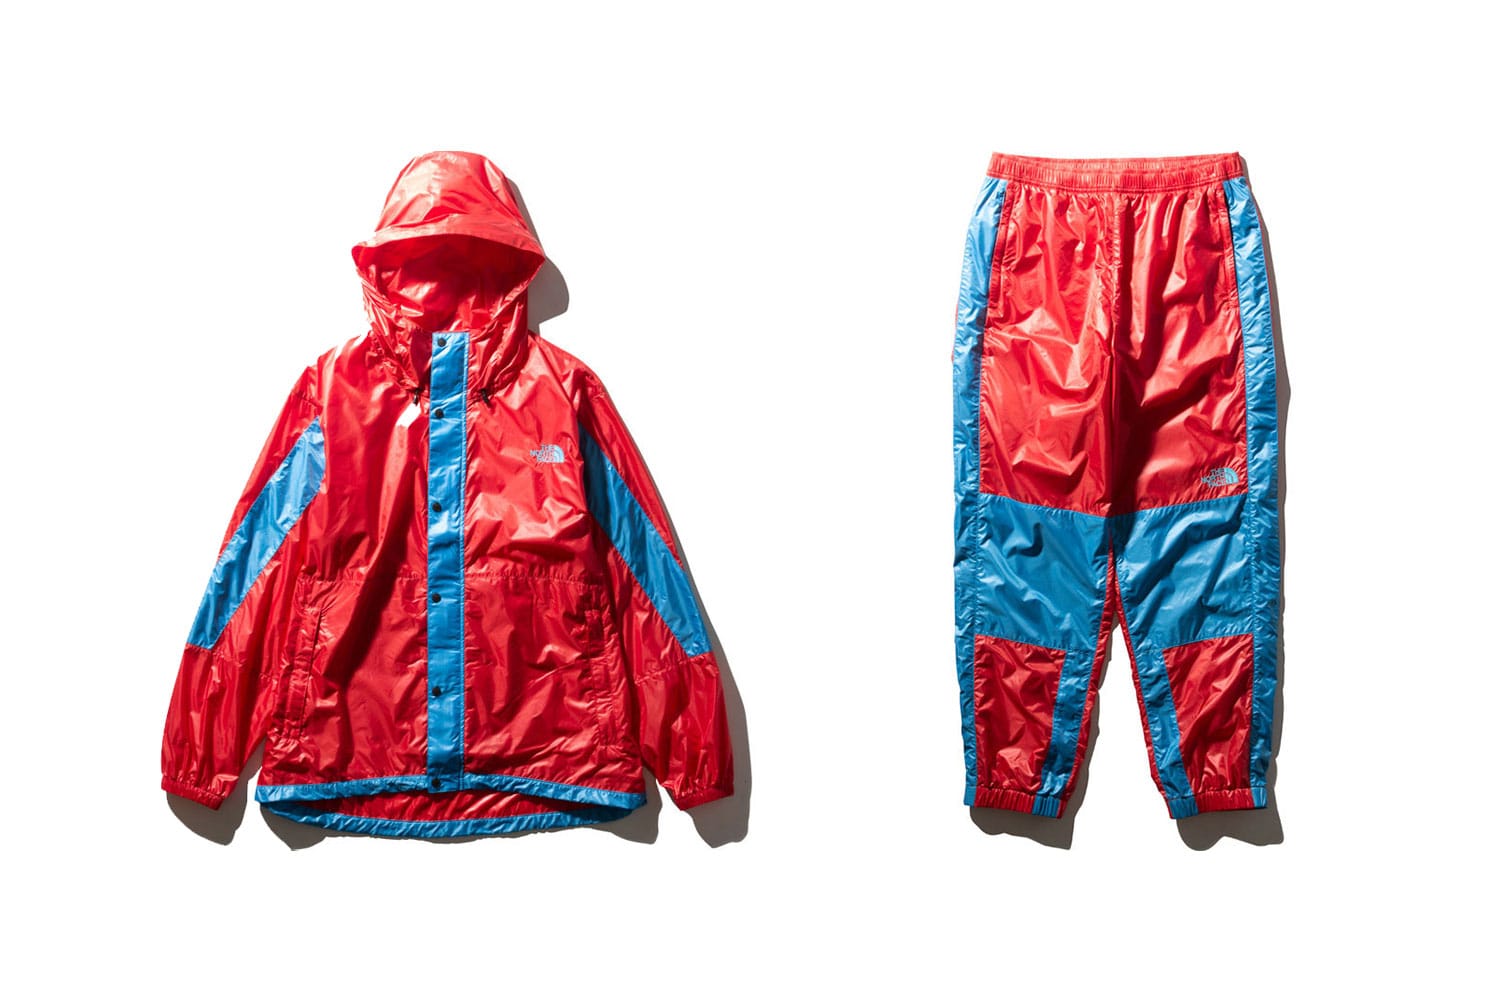 the north face packable anorak